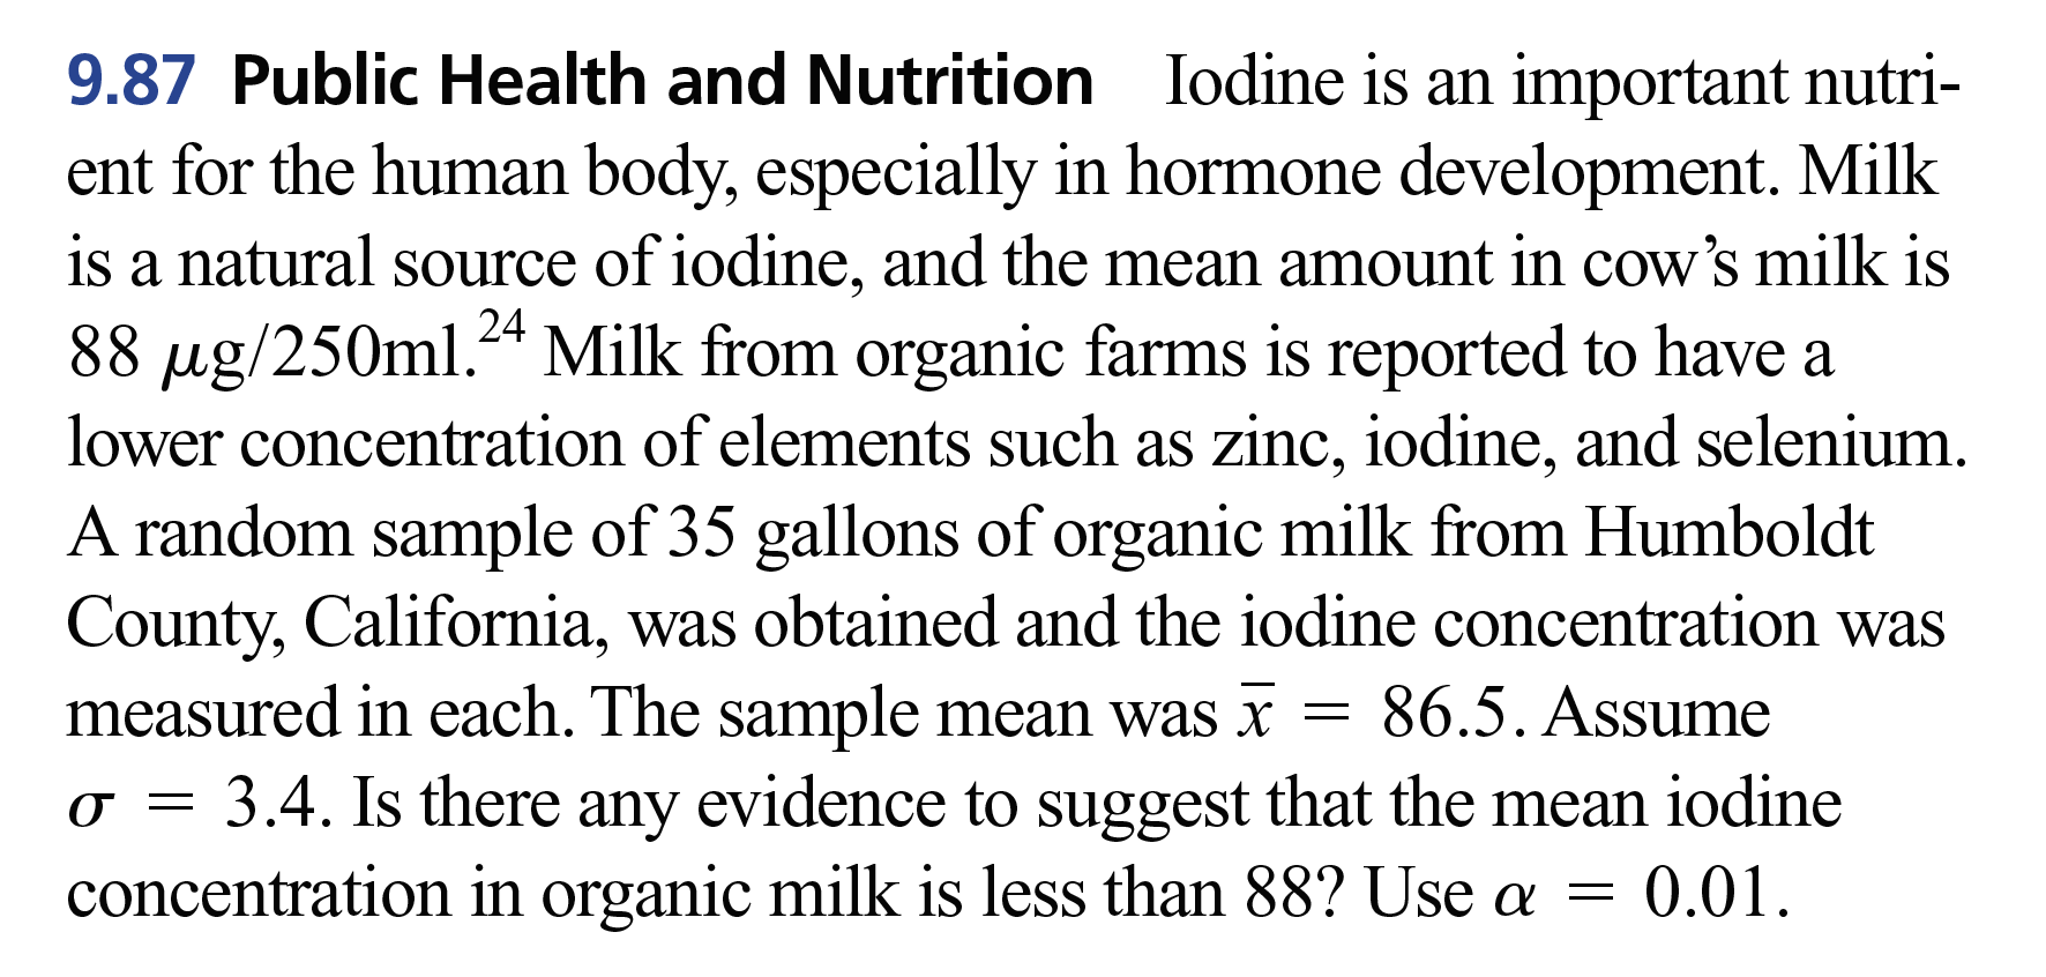 what is iodine good for in the human body